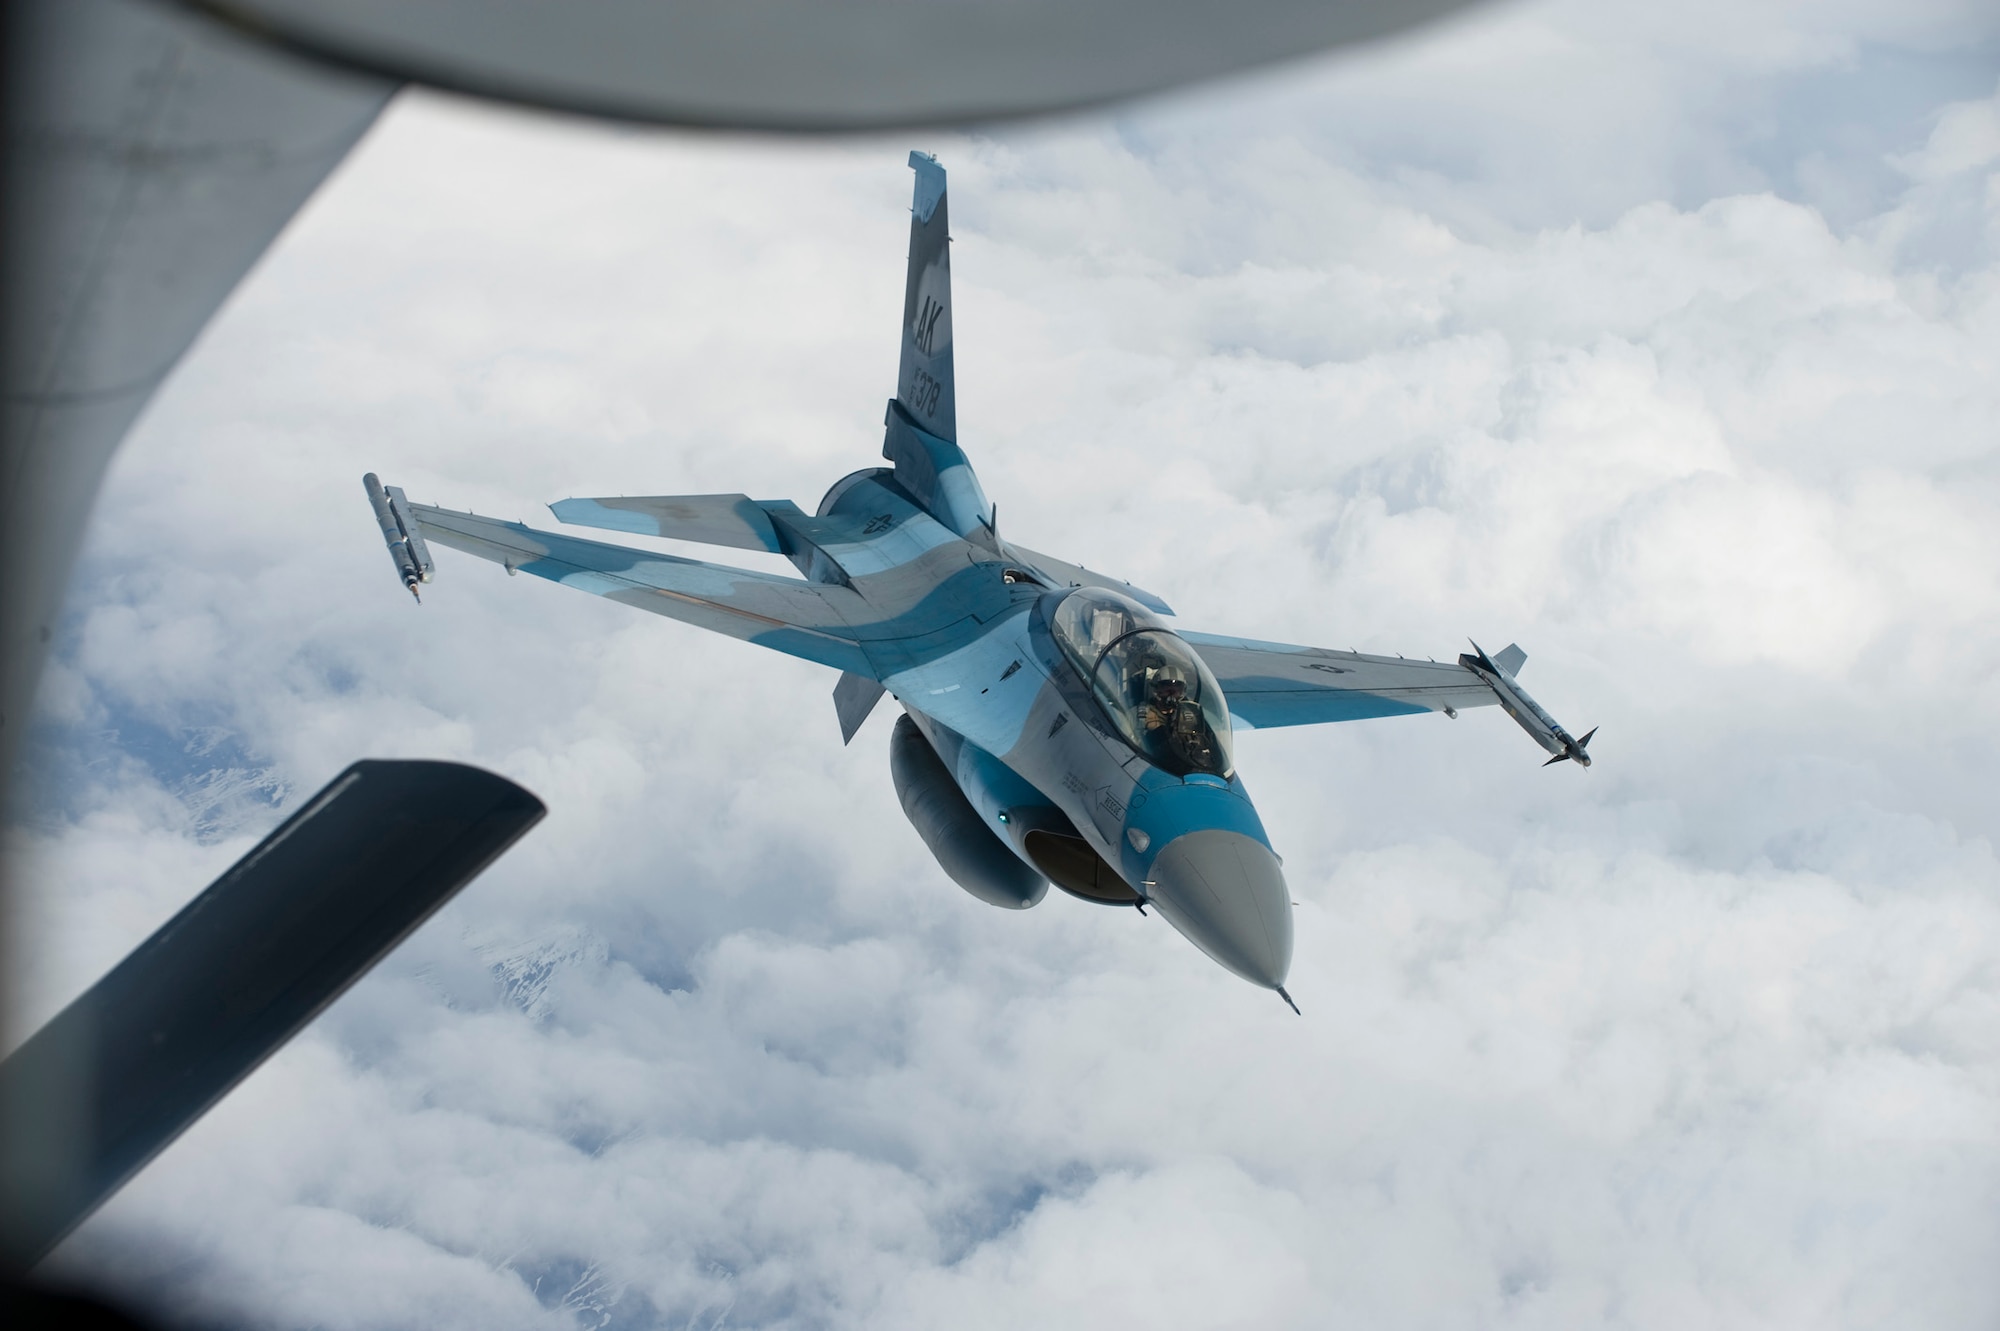 An F-16 Aggressor approaches a KC-135 Stratotanker to be refueled so he can return to the fight June 10, 2008, at Eielson Air Force Base, Alaska during RED FLAG-Alaska 08-3. The Pacific Alaskan Range Complex provides 67,000 square miles of airspace, one conventional bombing range and two tactical bombing ranges containing more than 400 different types of targets and more than 30 threat simulators, both manned and unmanned. This aircraft is assigned to the 18th Aggressor Squadron. (U.S. Air Force Photo/Airman 1st Class Jonathan Snyder)